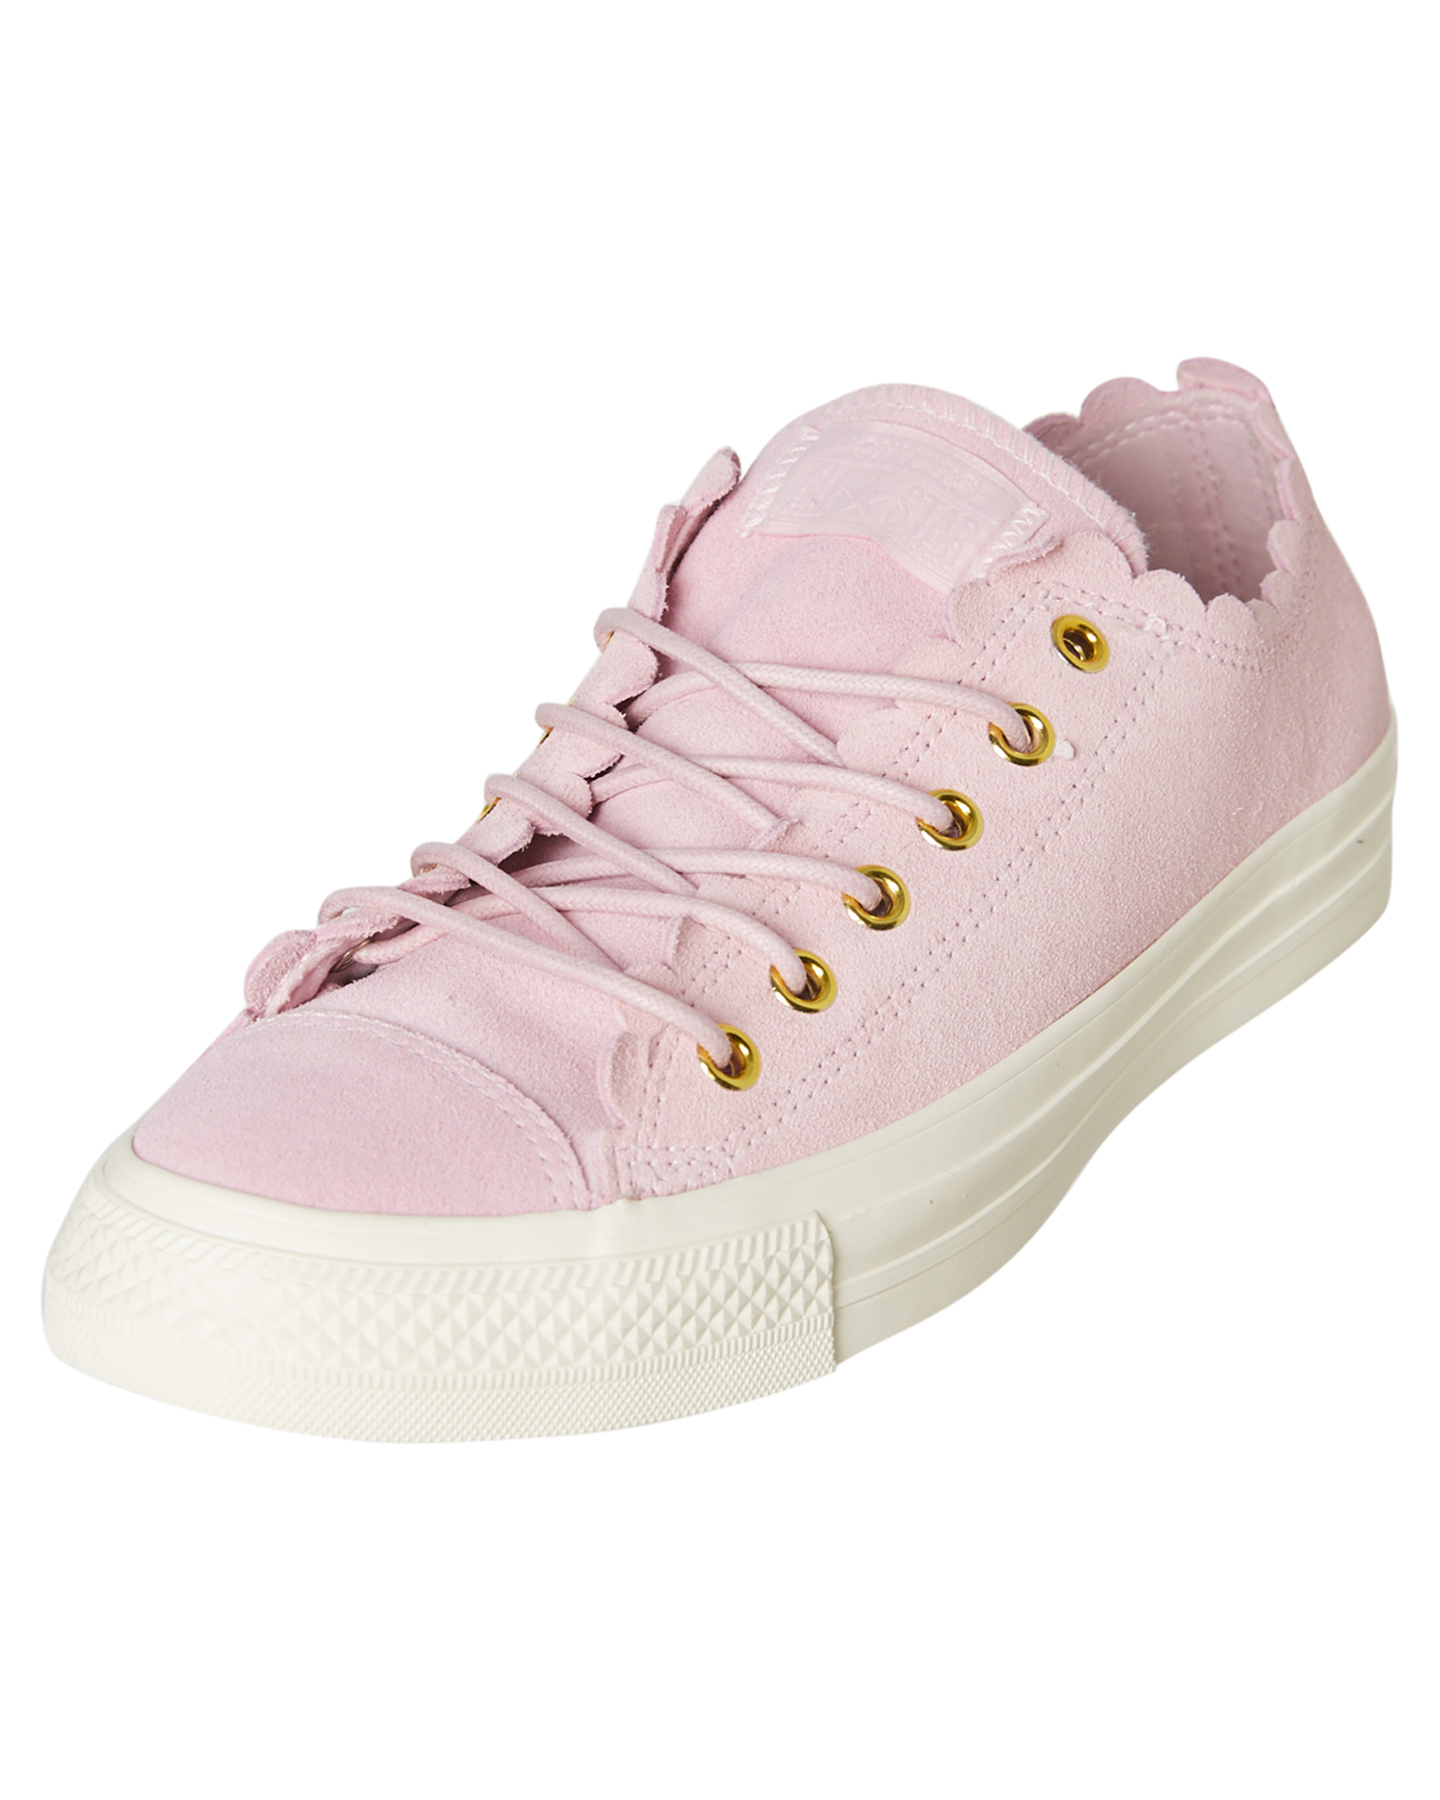 Converse Womens Chuck Taylor Frilly Thrills Lo Shoe - Pink | SurfStitch